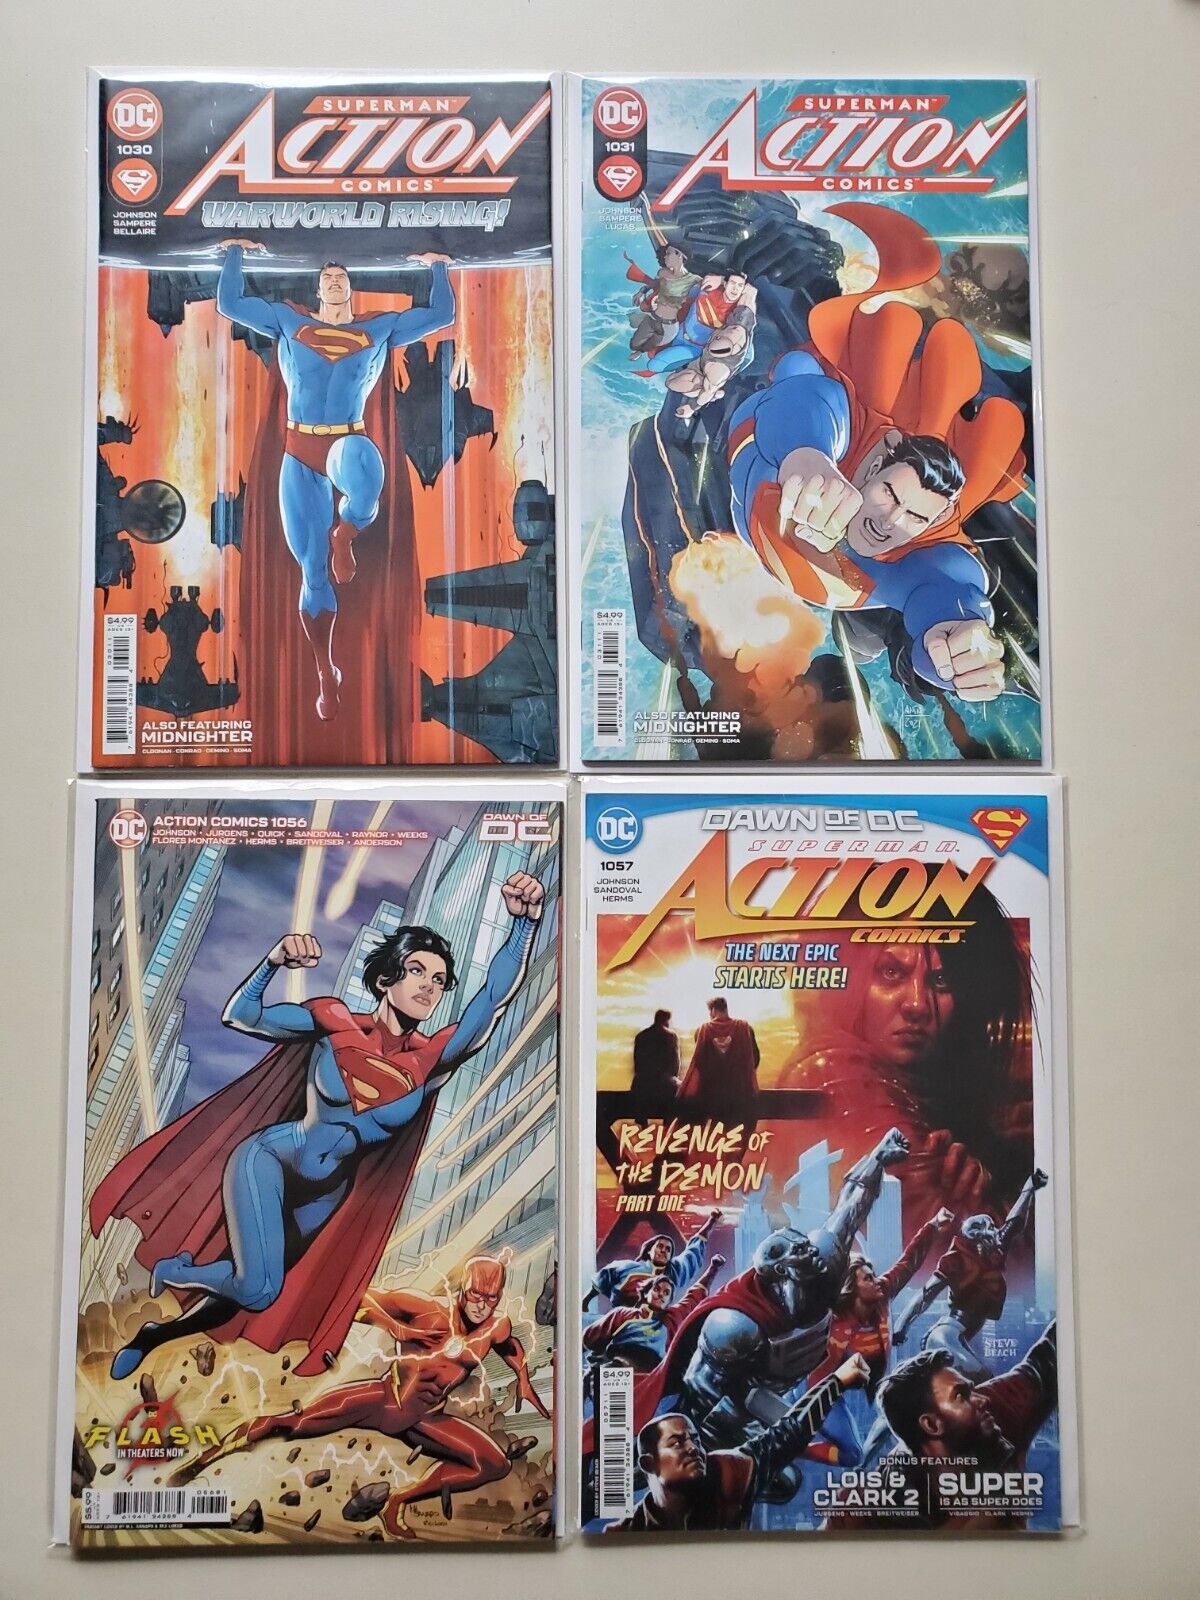 Lot of 4 ACTION COMICS #1030, 1031, 1056, 1057 - KEY Issues - 1st Appearances